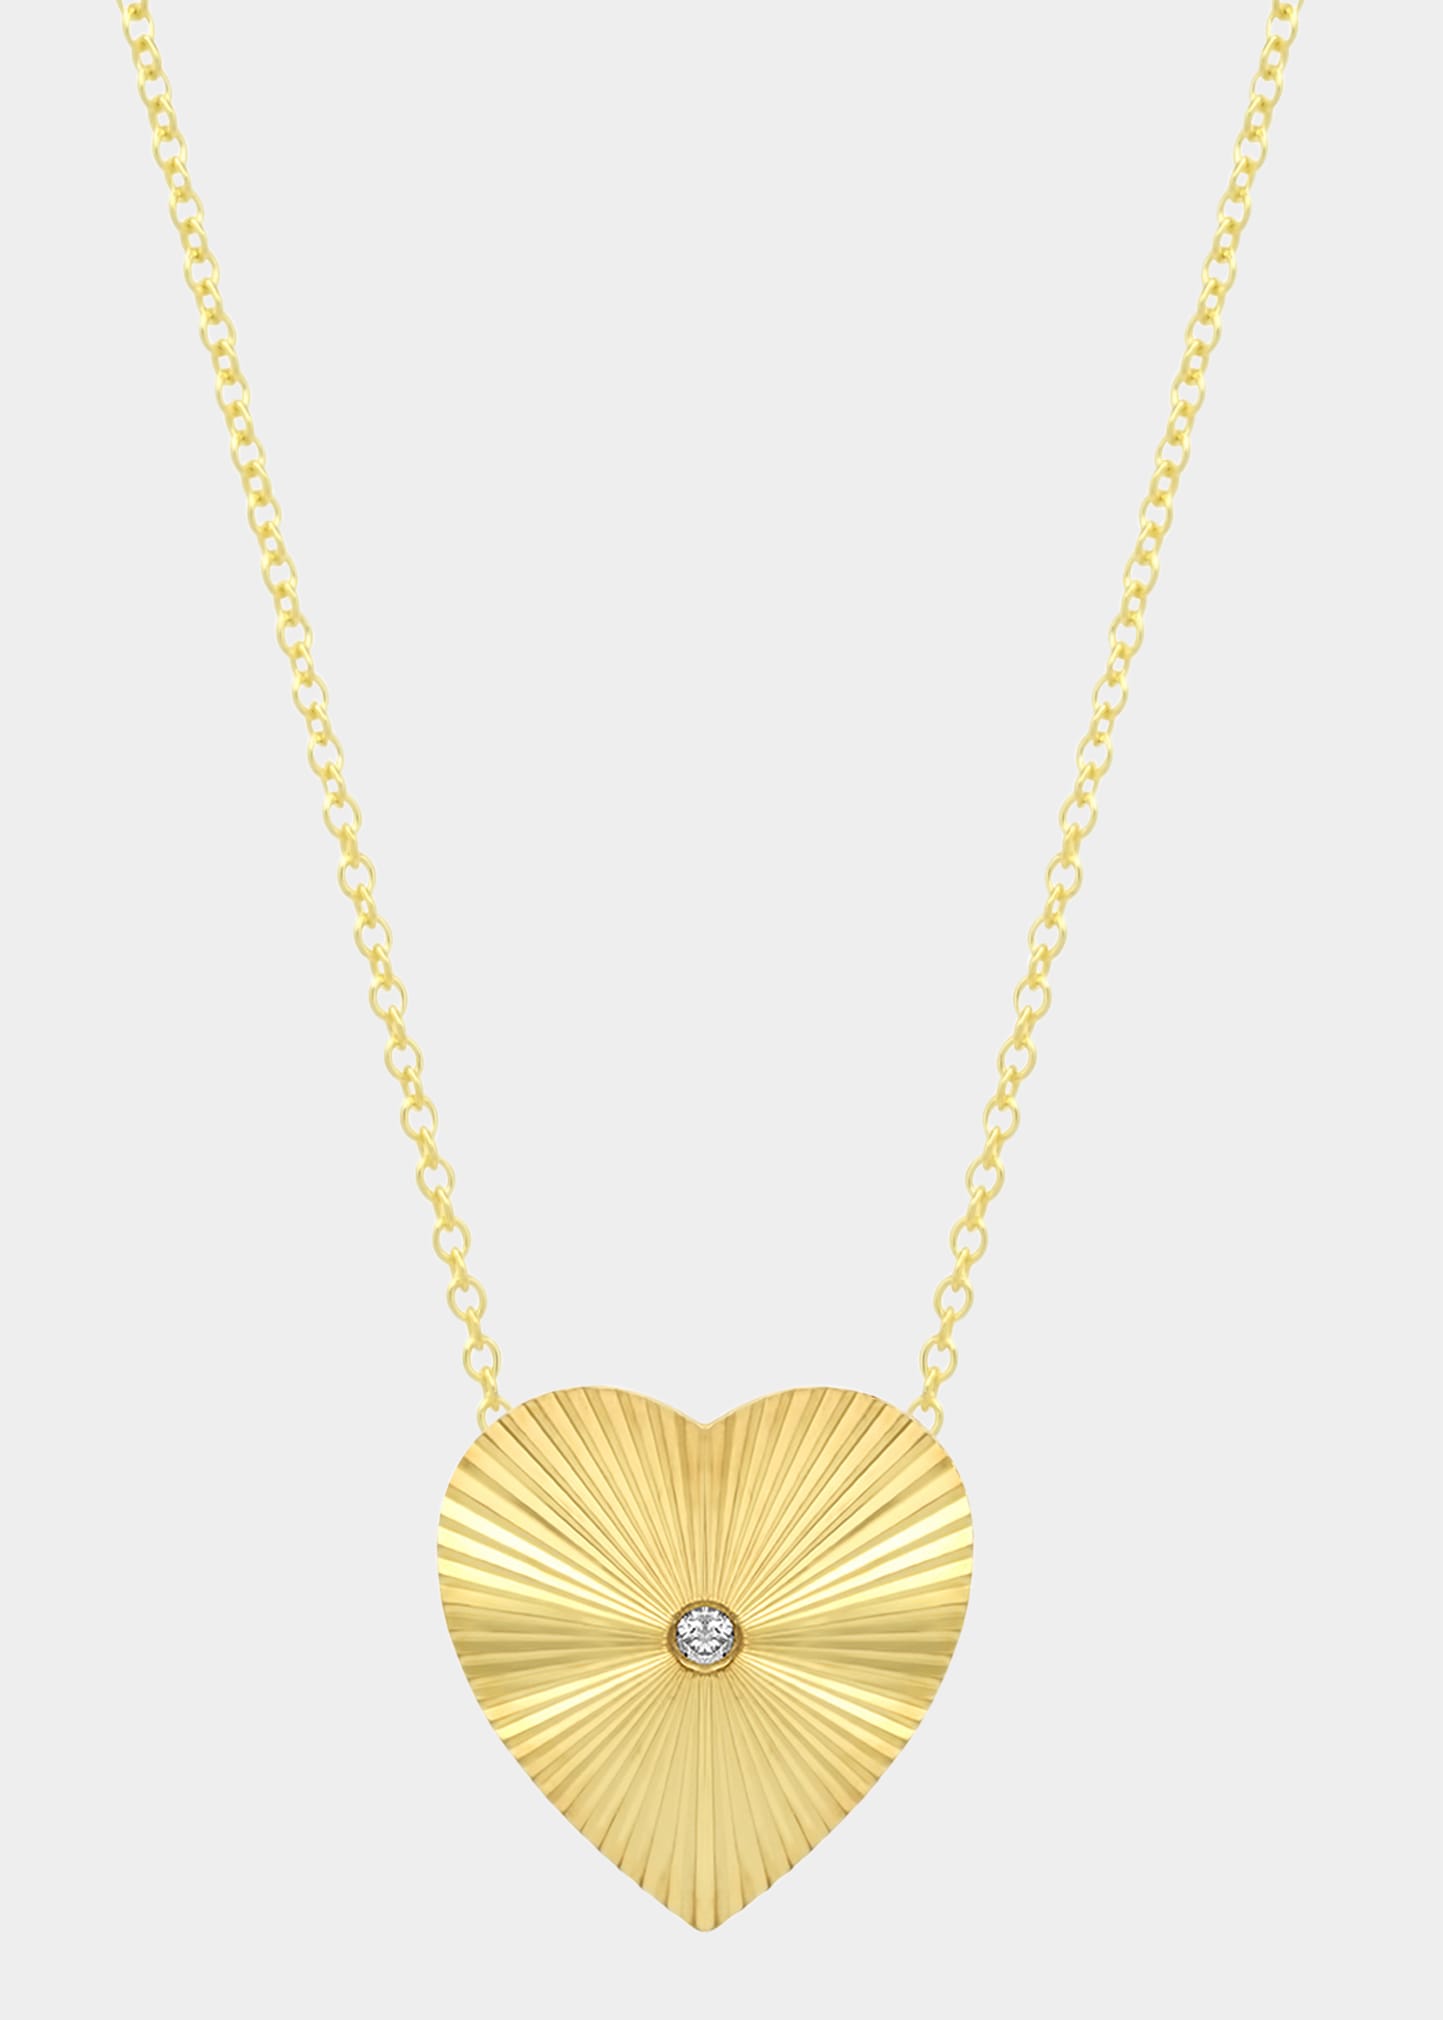 Mini '70s Heart Necklace with Diamond in 18K Gold